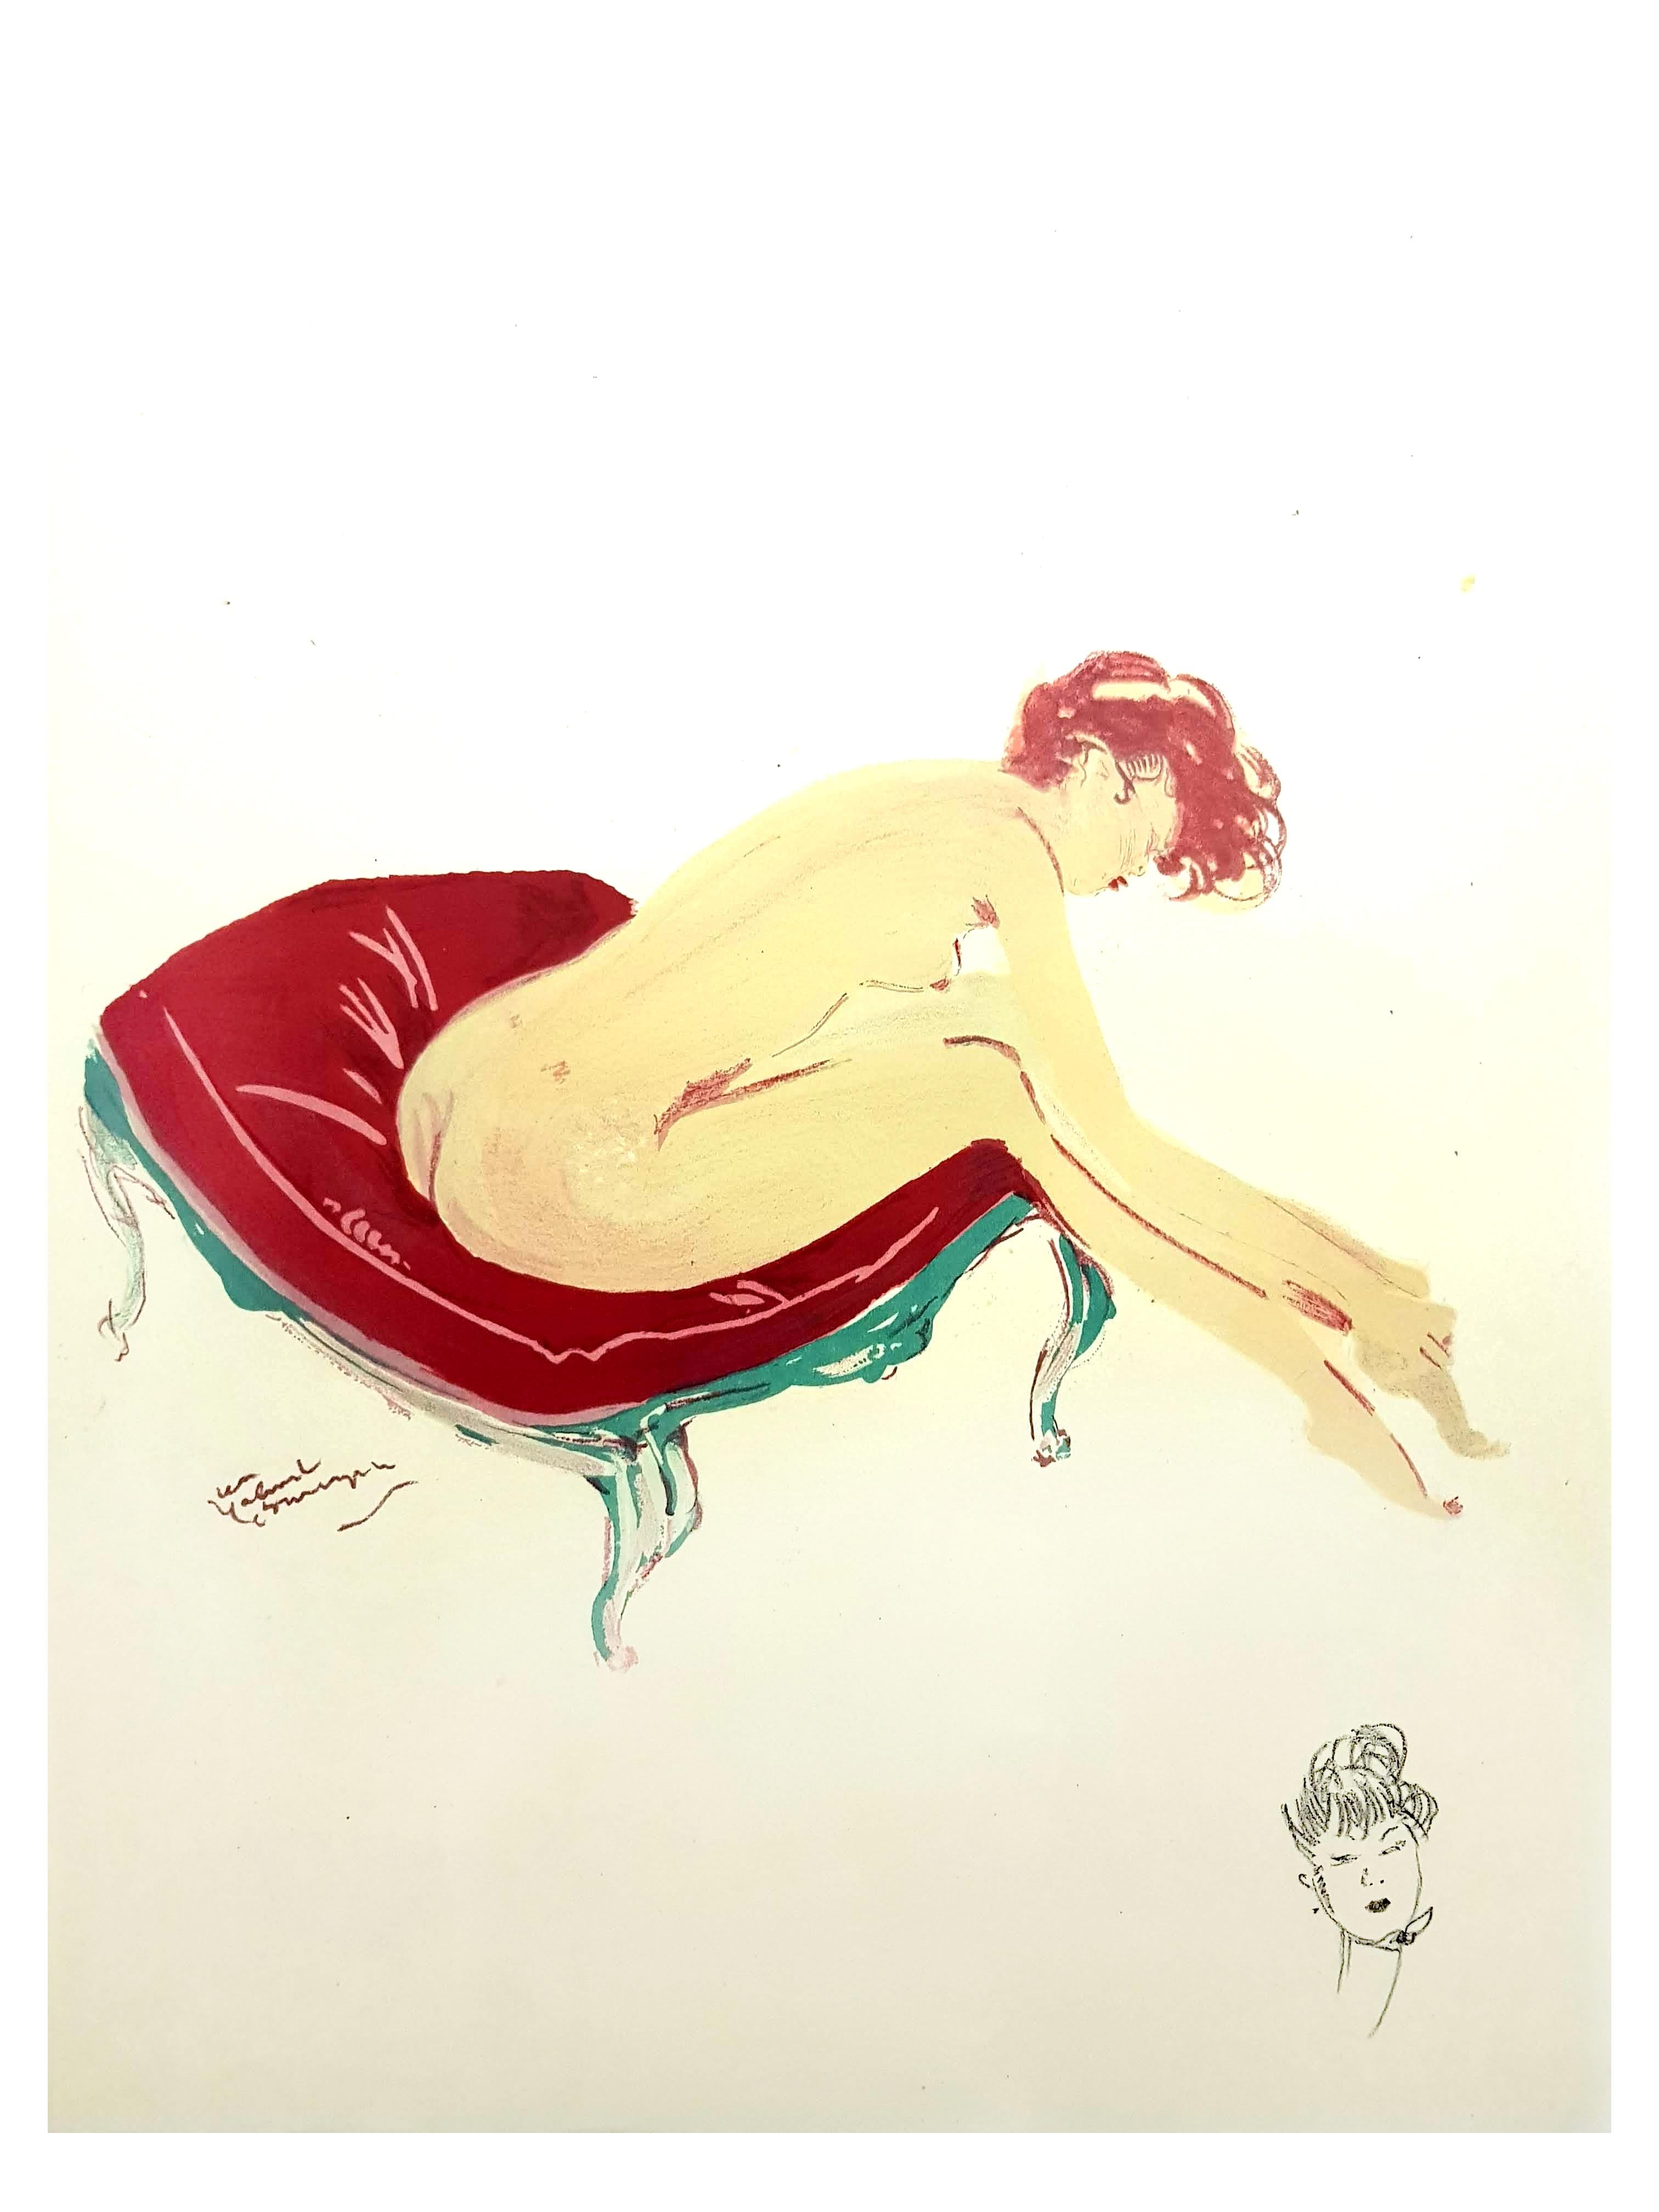 Original Lithograph by Jean-Gabriel Domergue
Title: Elegance
Signed in the plate
Dimensions: 40 x 31 cm
1956
Edition of 197
This artwork is part of the famous portfolio 